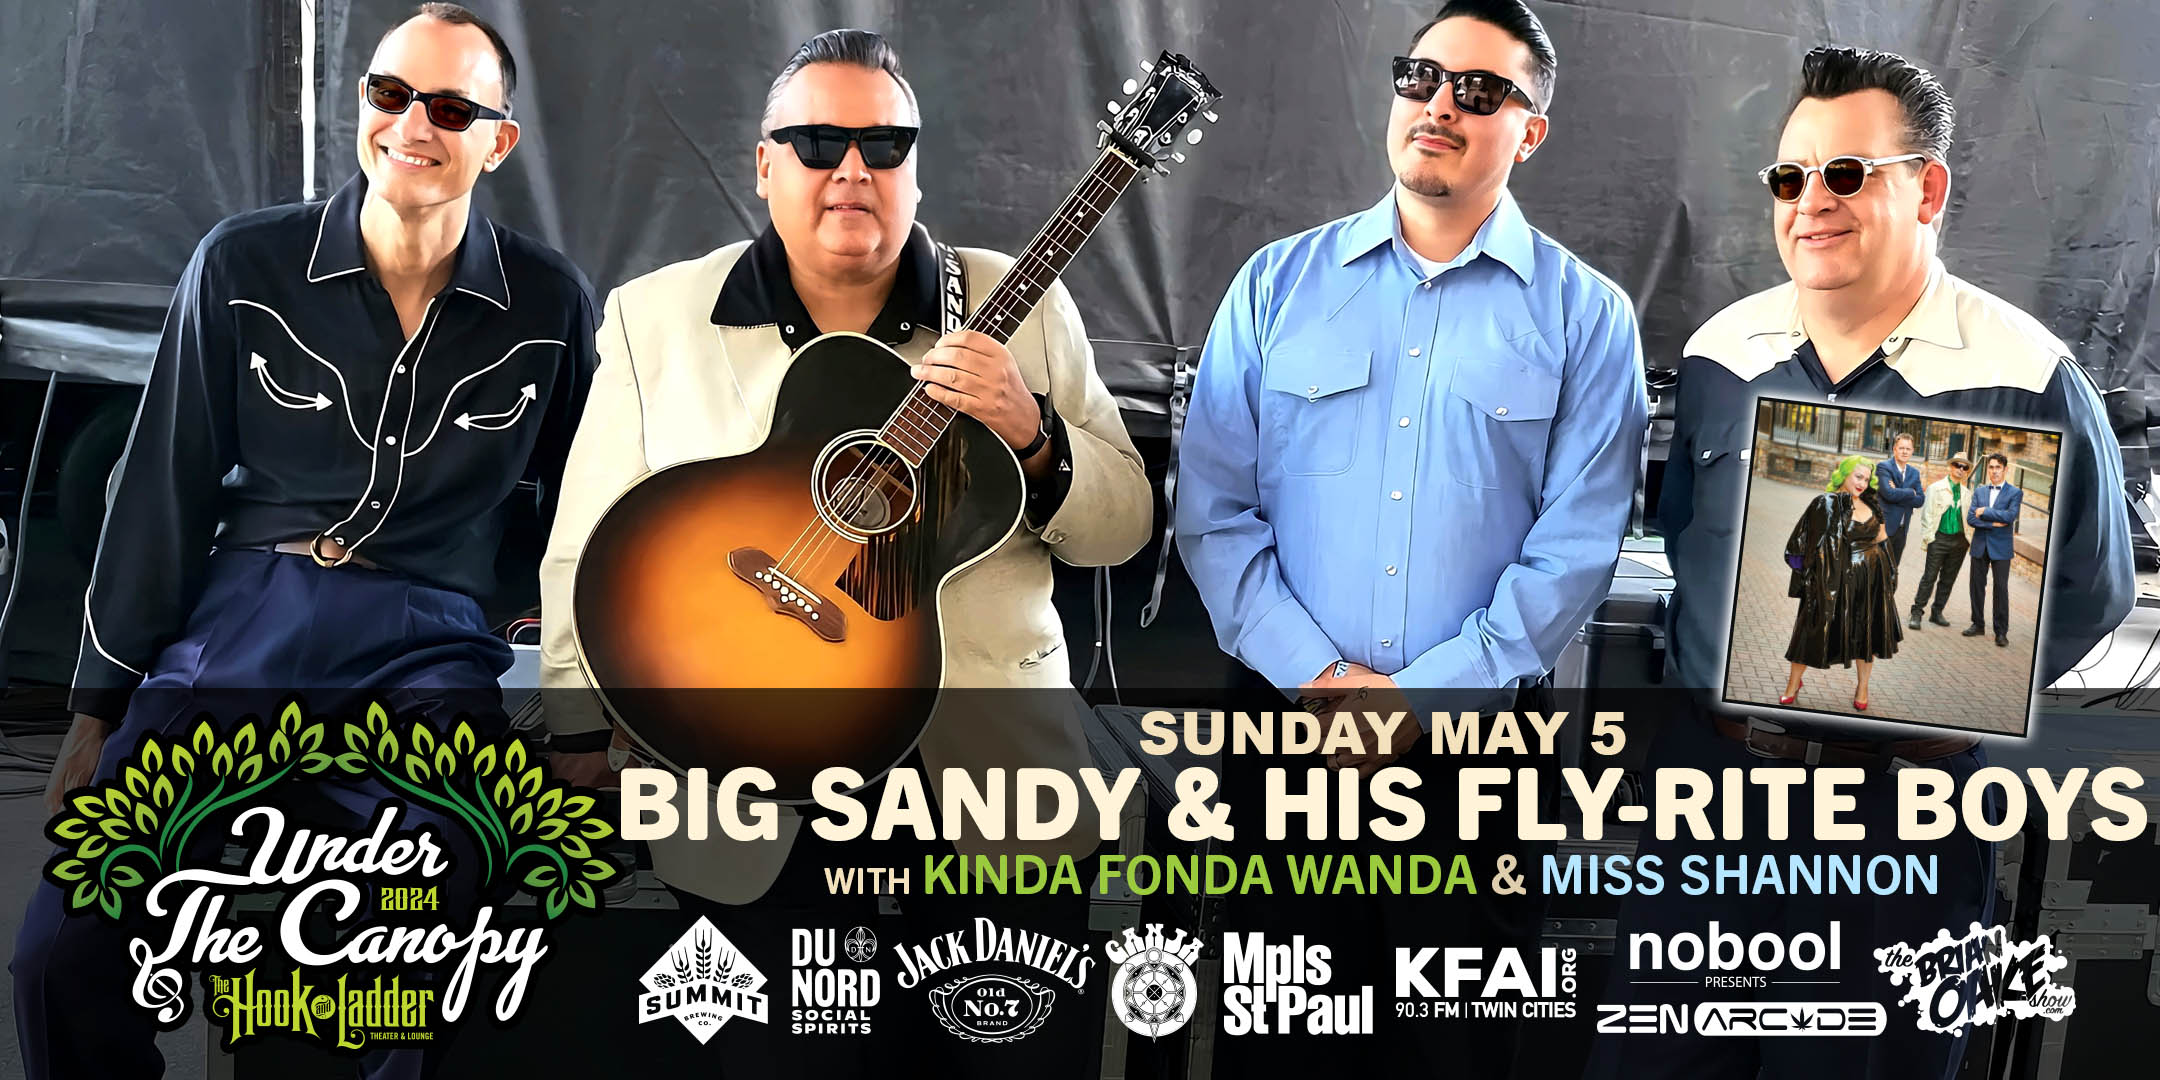 Big Sandy & His Fly-Rite Boys with Kinda Fonda Wanda and Swing Dance Lessons by Miss Shannon’s Dance Class Sunday, May 5 Under The Canopy at The Hook and Ladder Theater "An Urban Outdoor Summer Concert Series" Doors 5:30pm :: Swing Dance Lessons 6:00pm :: Music 7:00pm :: 21+ Reserved Seats: $28 GA: $18 ADV / $24 DOS